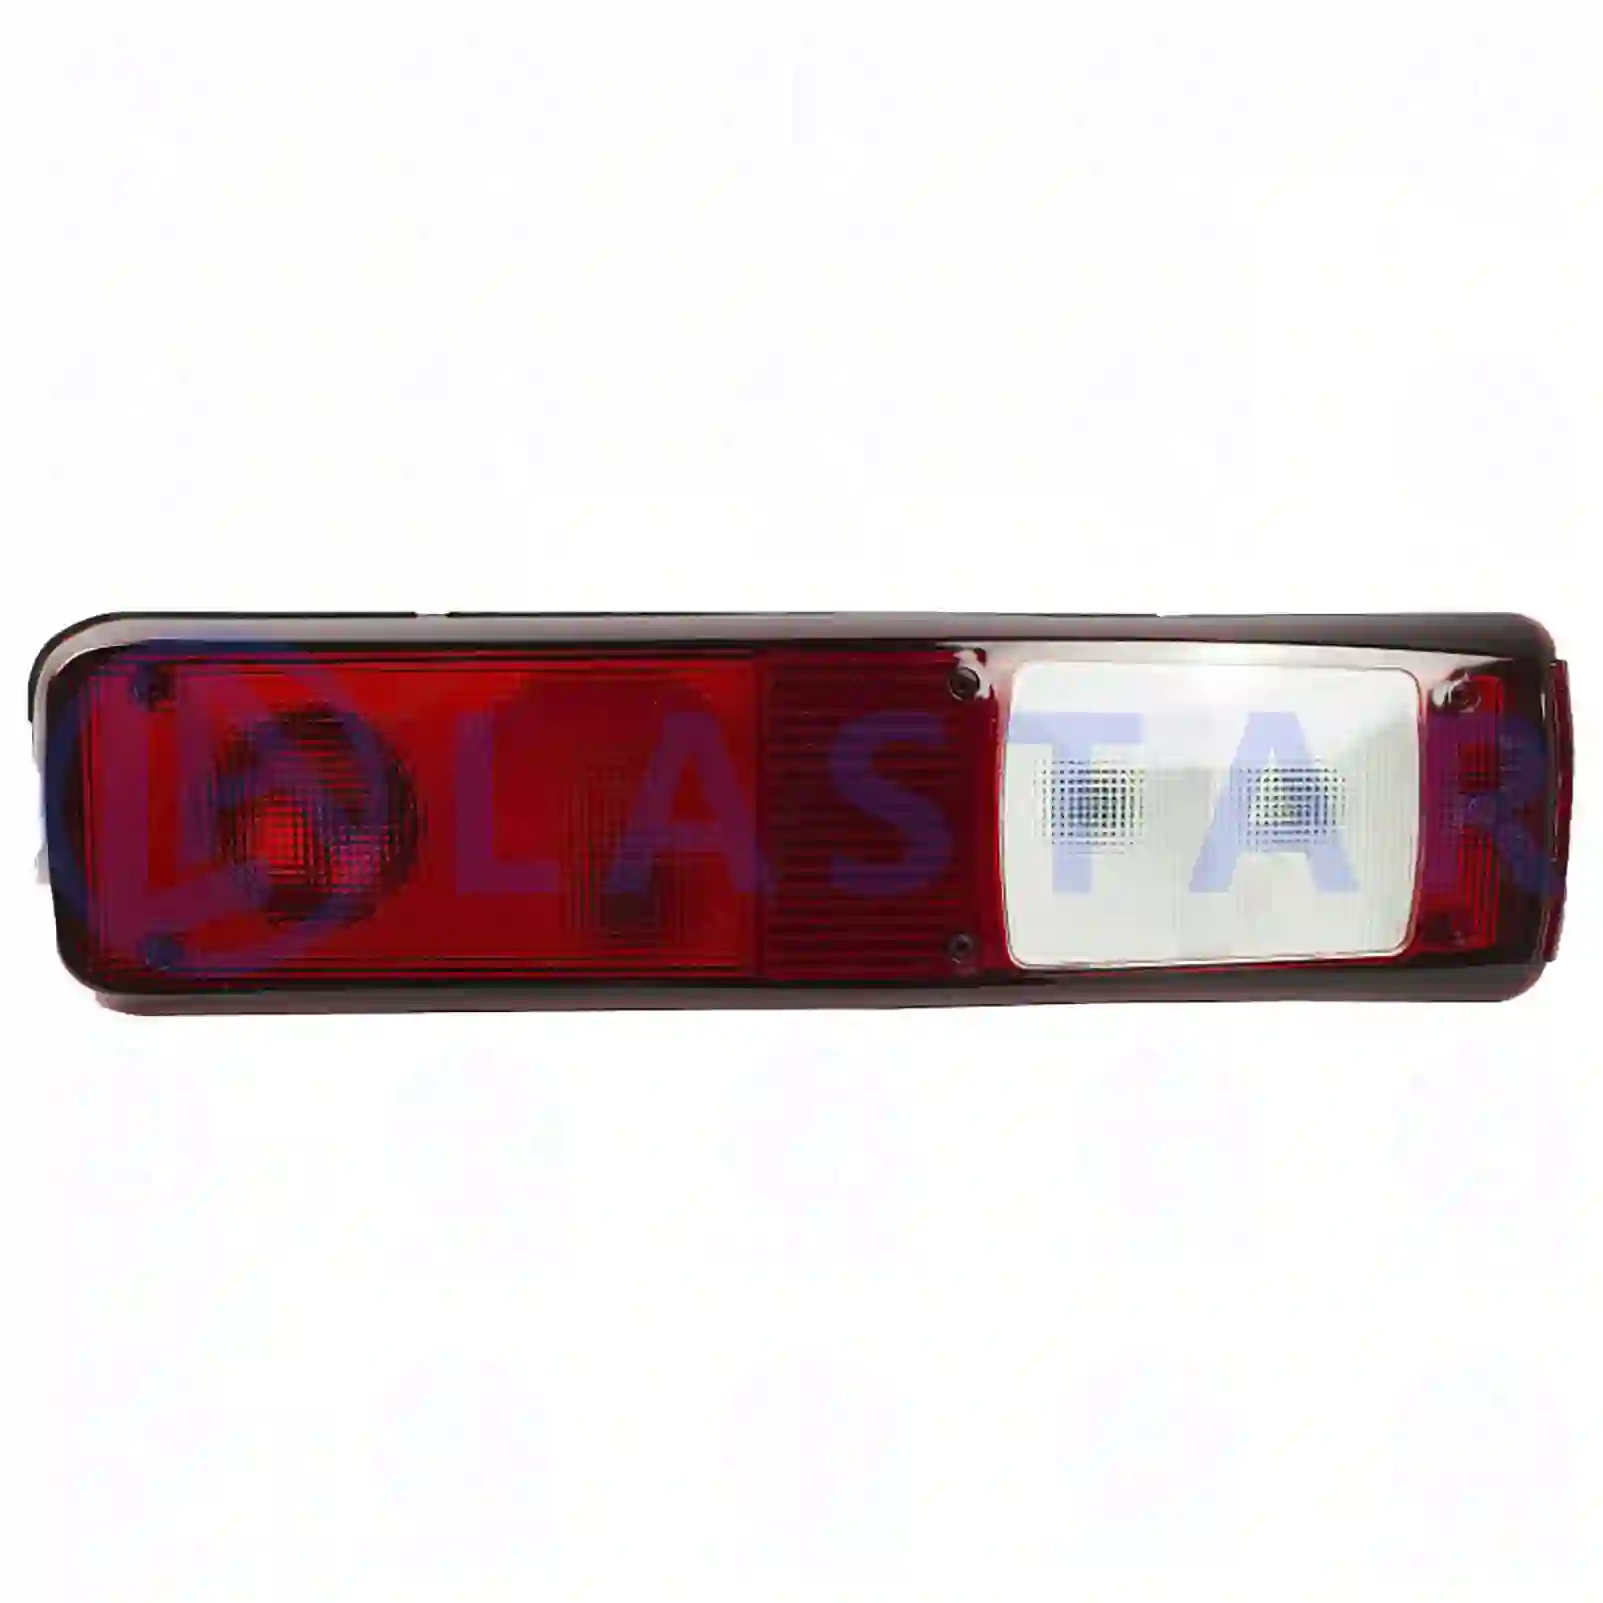 Tail lamp, right, 77711074, 7420802350, 20769776, 20802350, , , ||  77711074 Lastar Spare Part | Truck Spare Parts, Auotomotive Spare Parts Tail lamp, right, 77711074, 7420802350, 20769776, 20802350, , , ||  77711074 Lastar Spare Part | Truck Spare Parts, Auotomotive Spare Parts